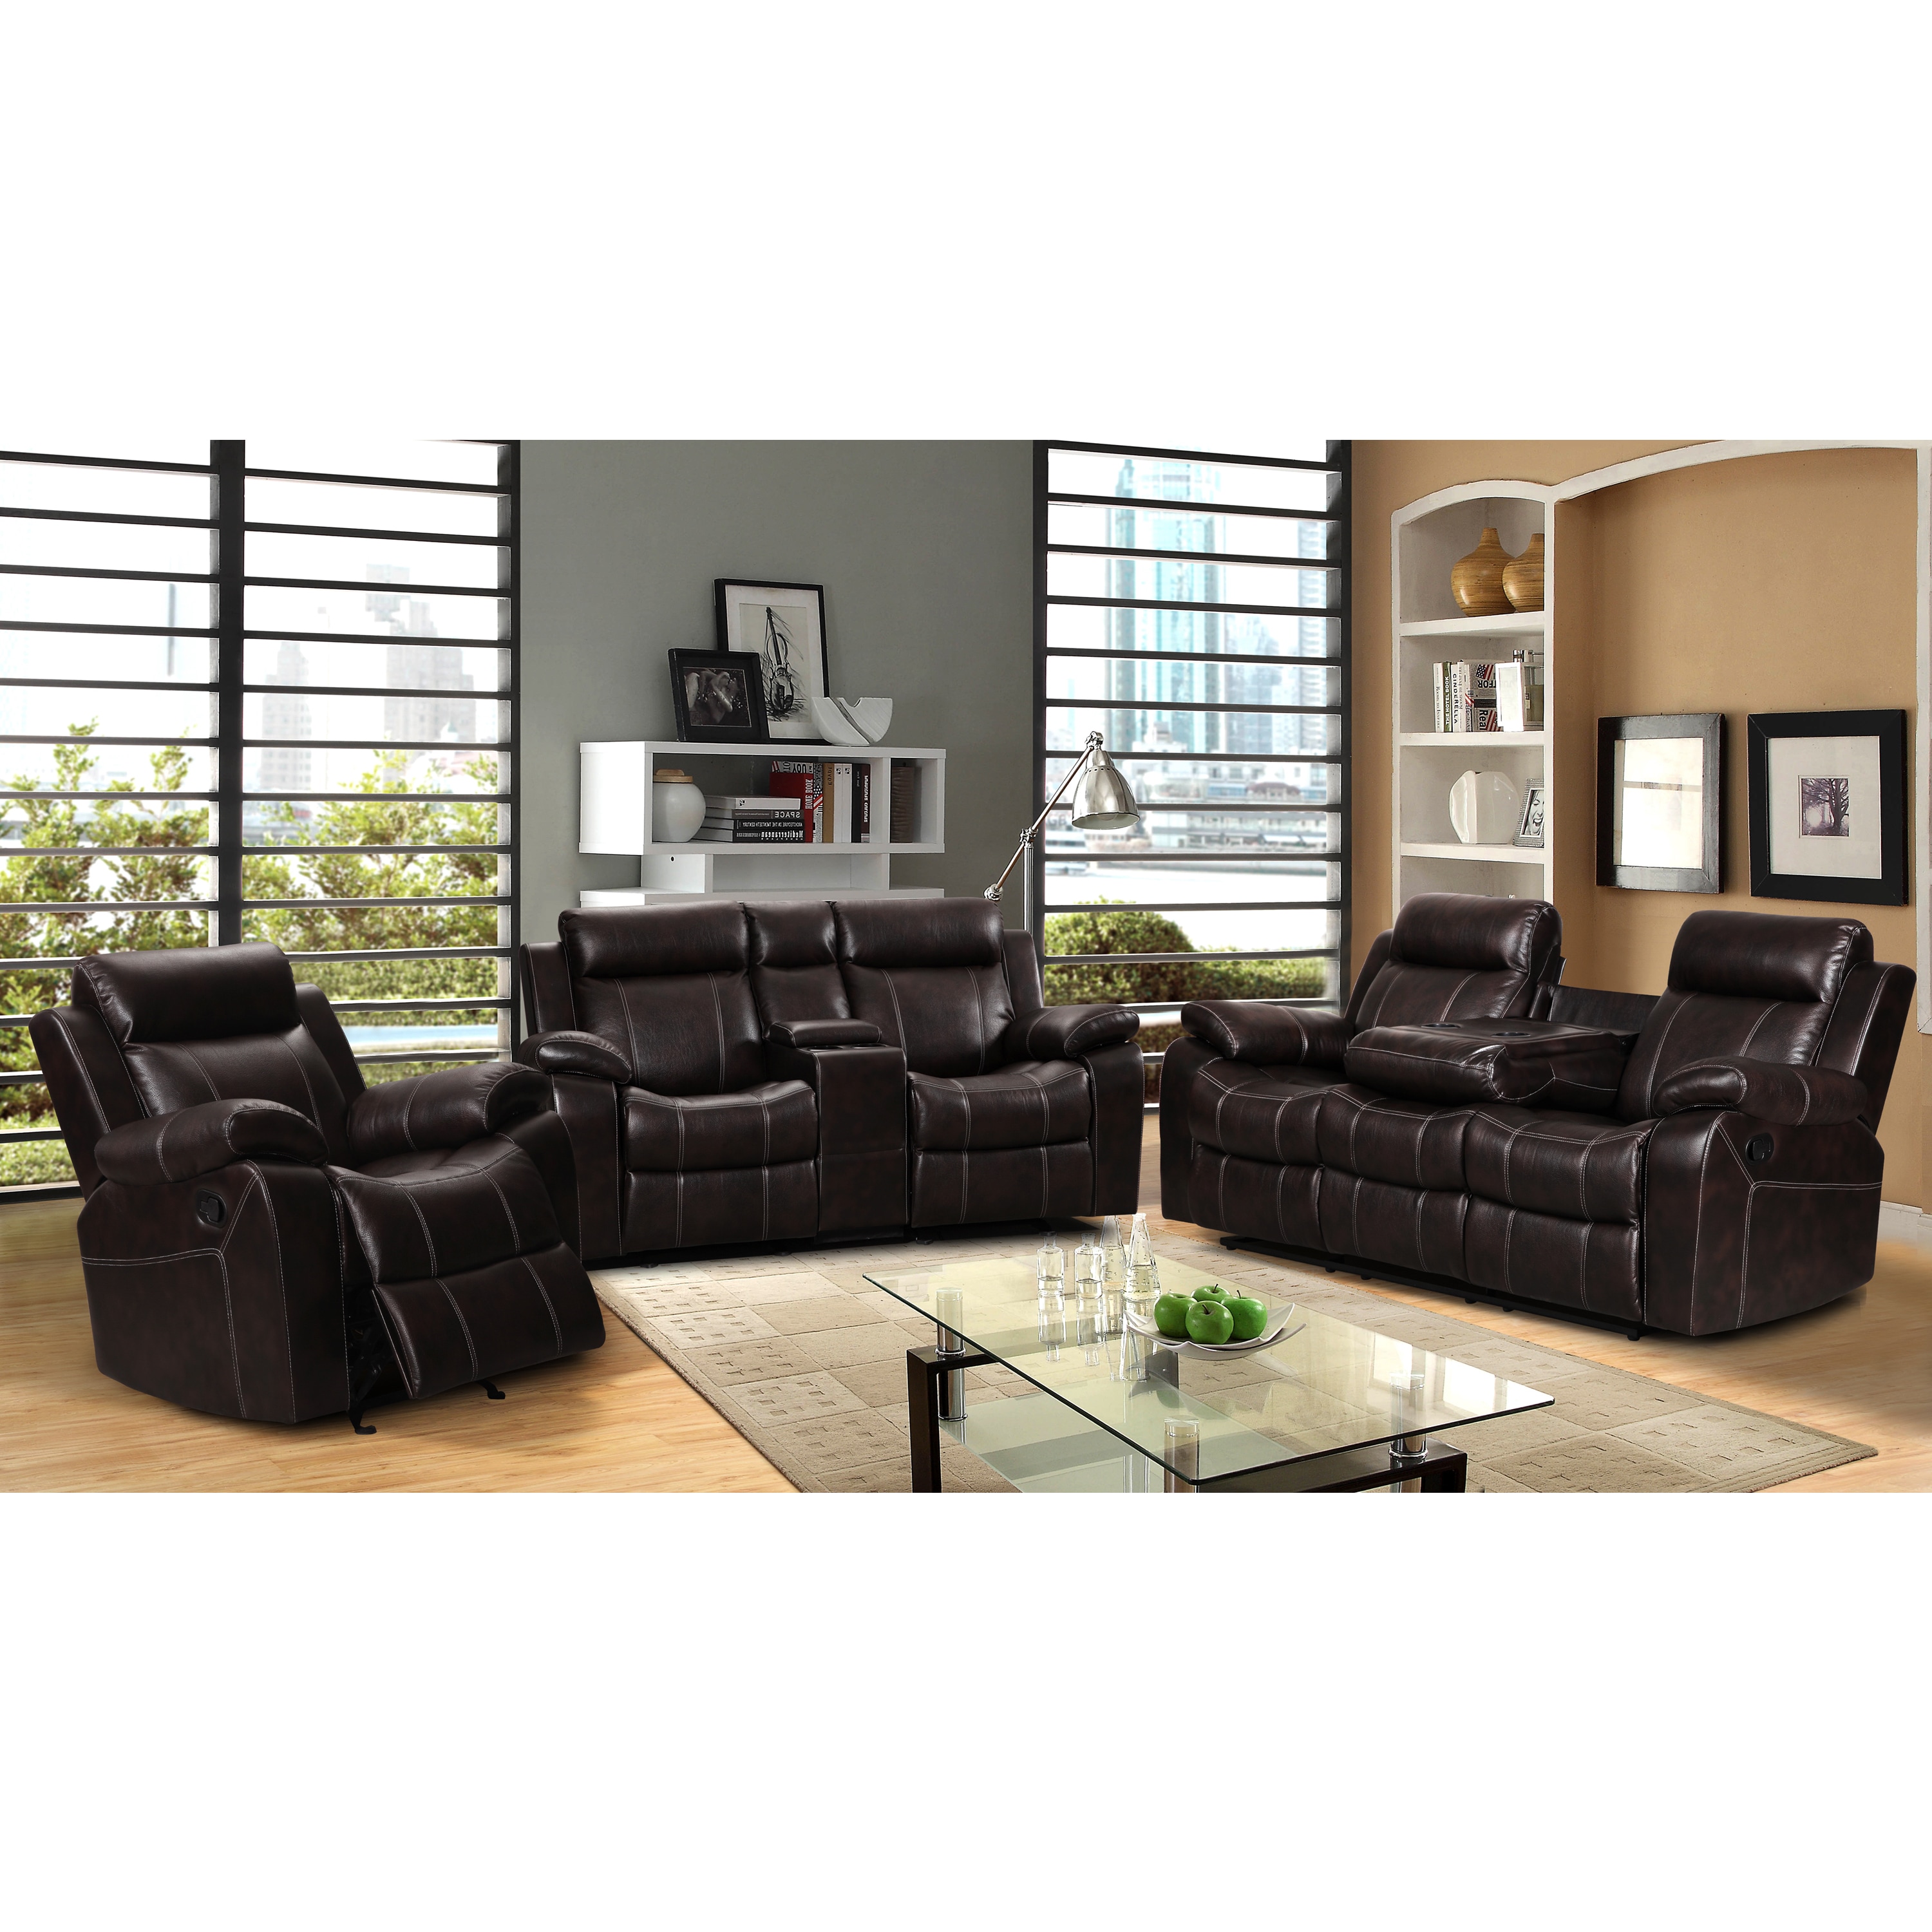 Finley Leather Gel 3 Piece Living Room Reclining Sofa Set On Sale Overstock 12816943